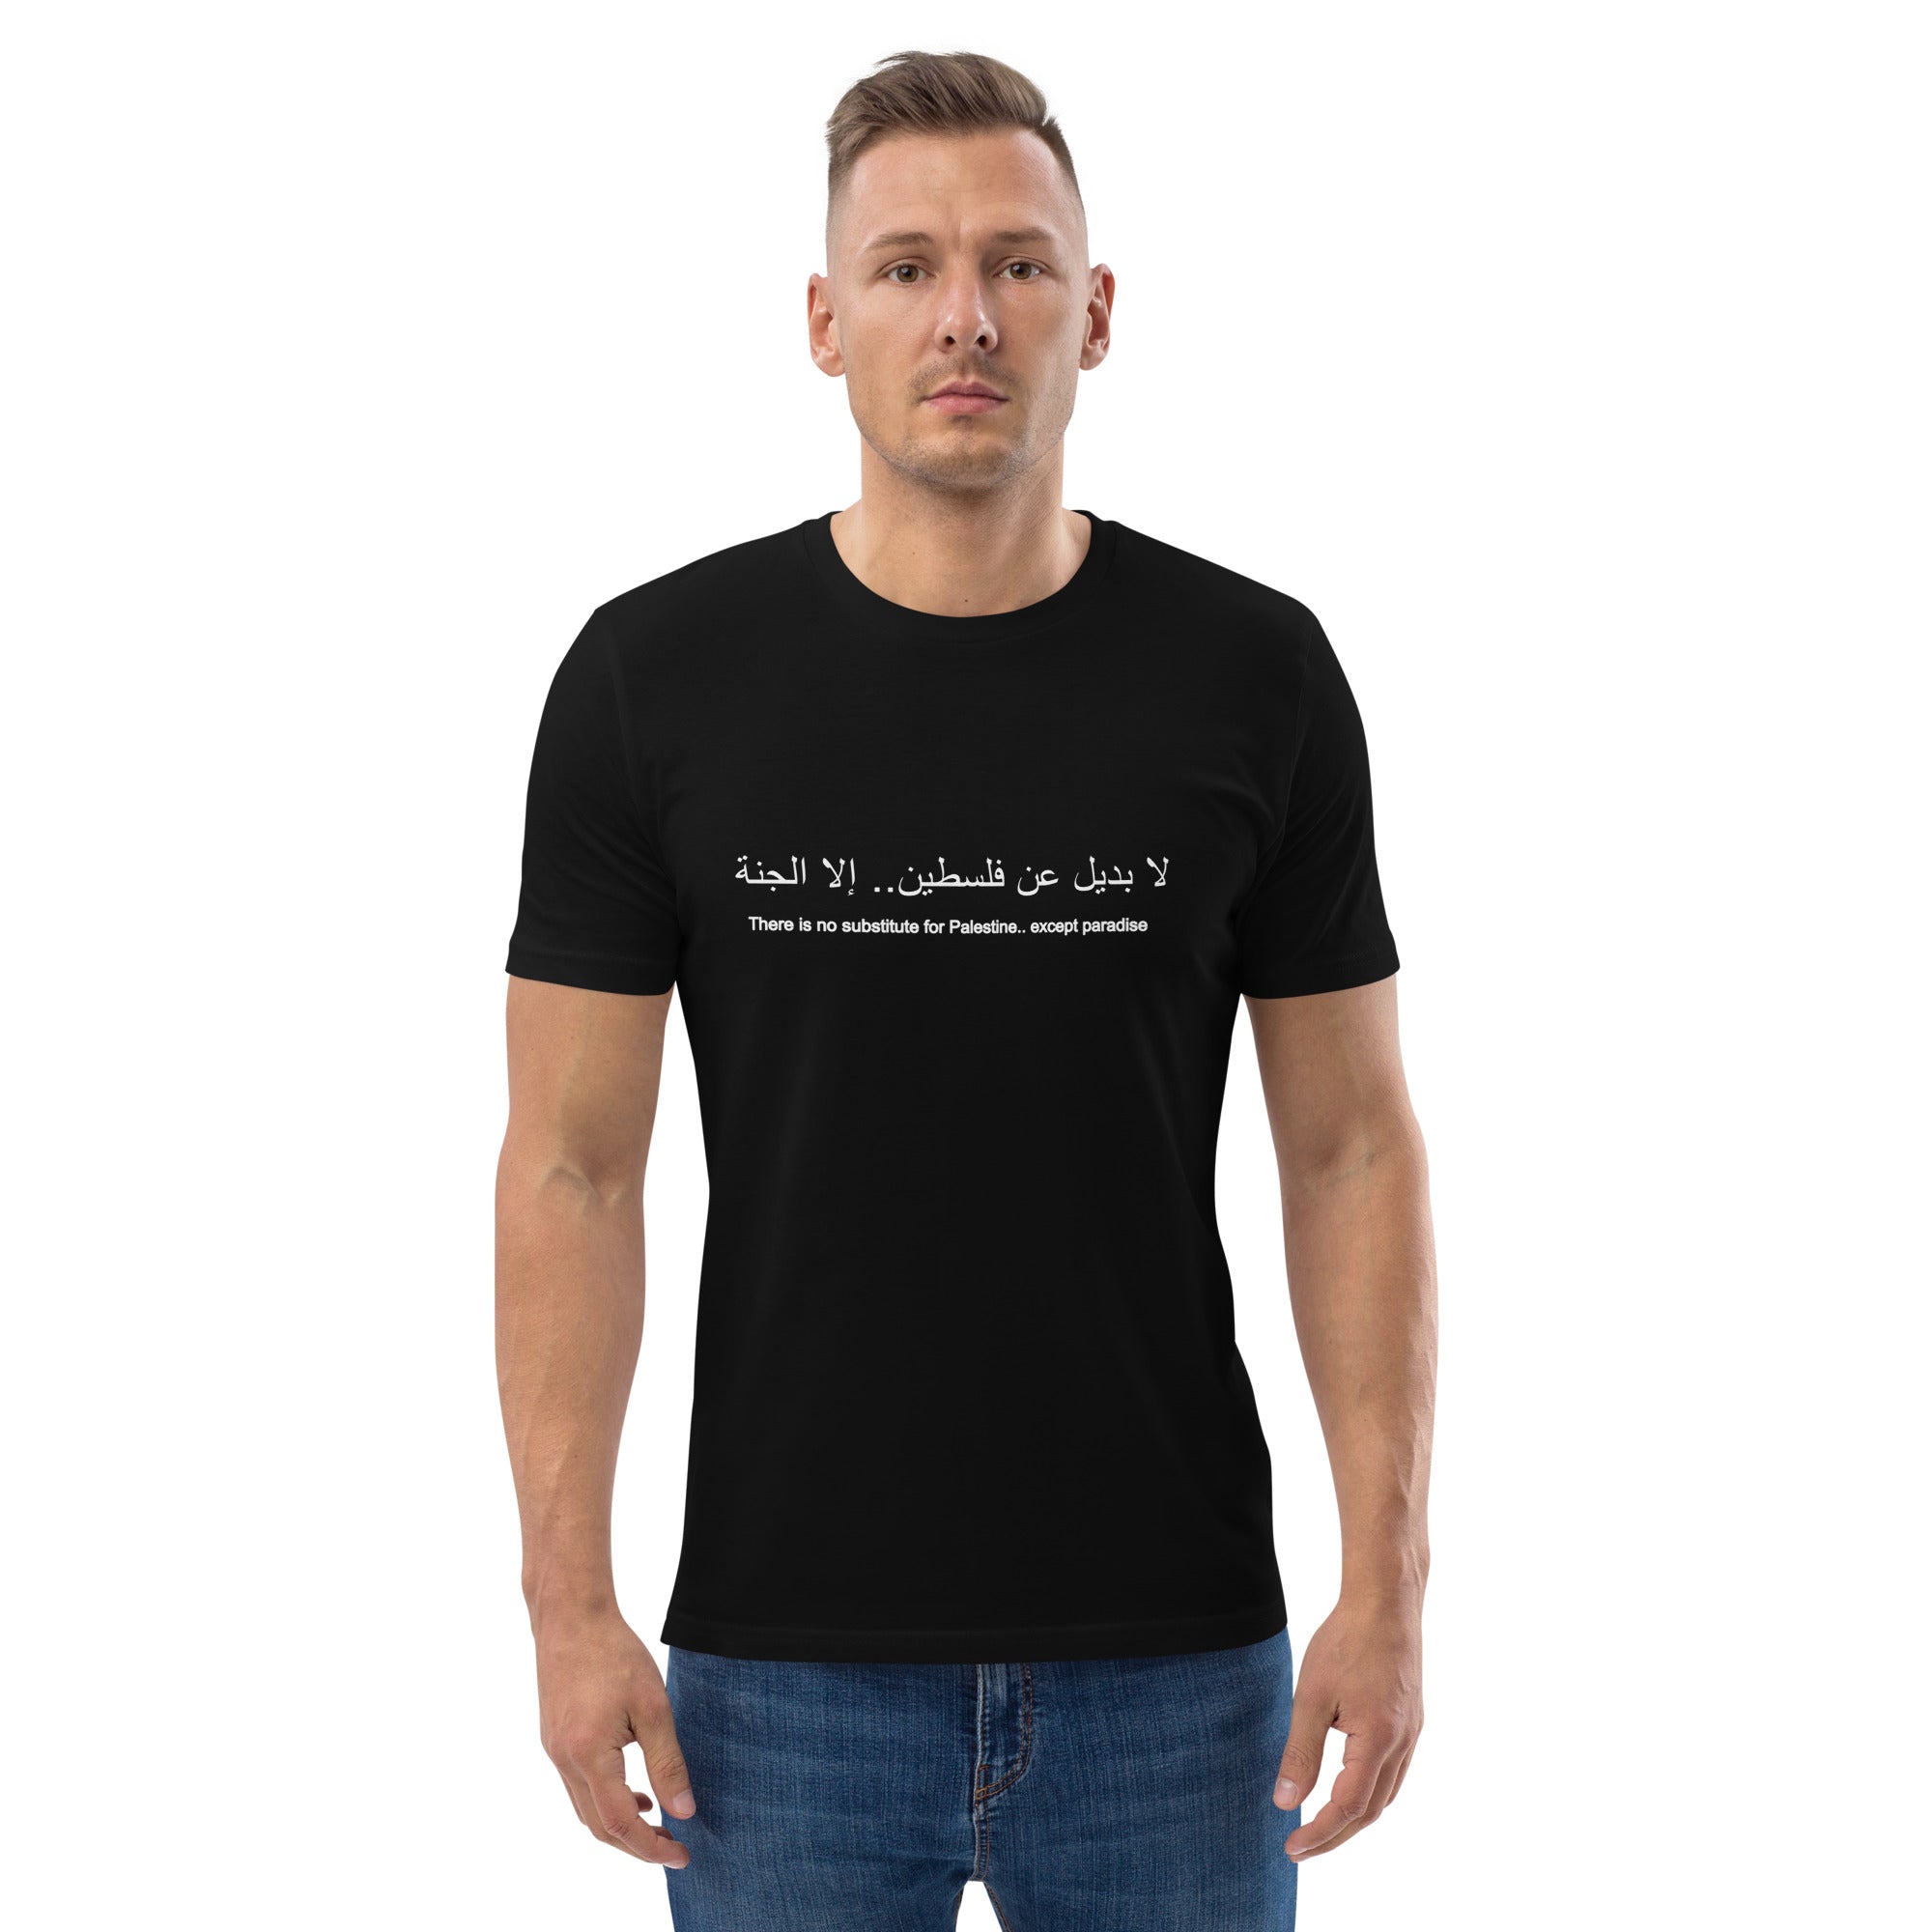 No substitute for Palestine - t-shirt